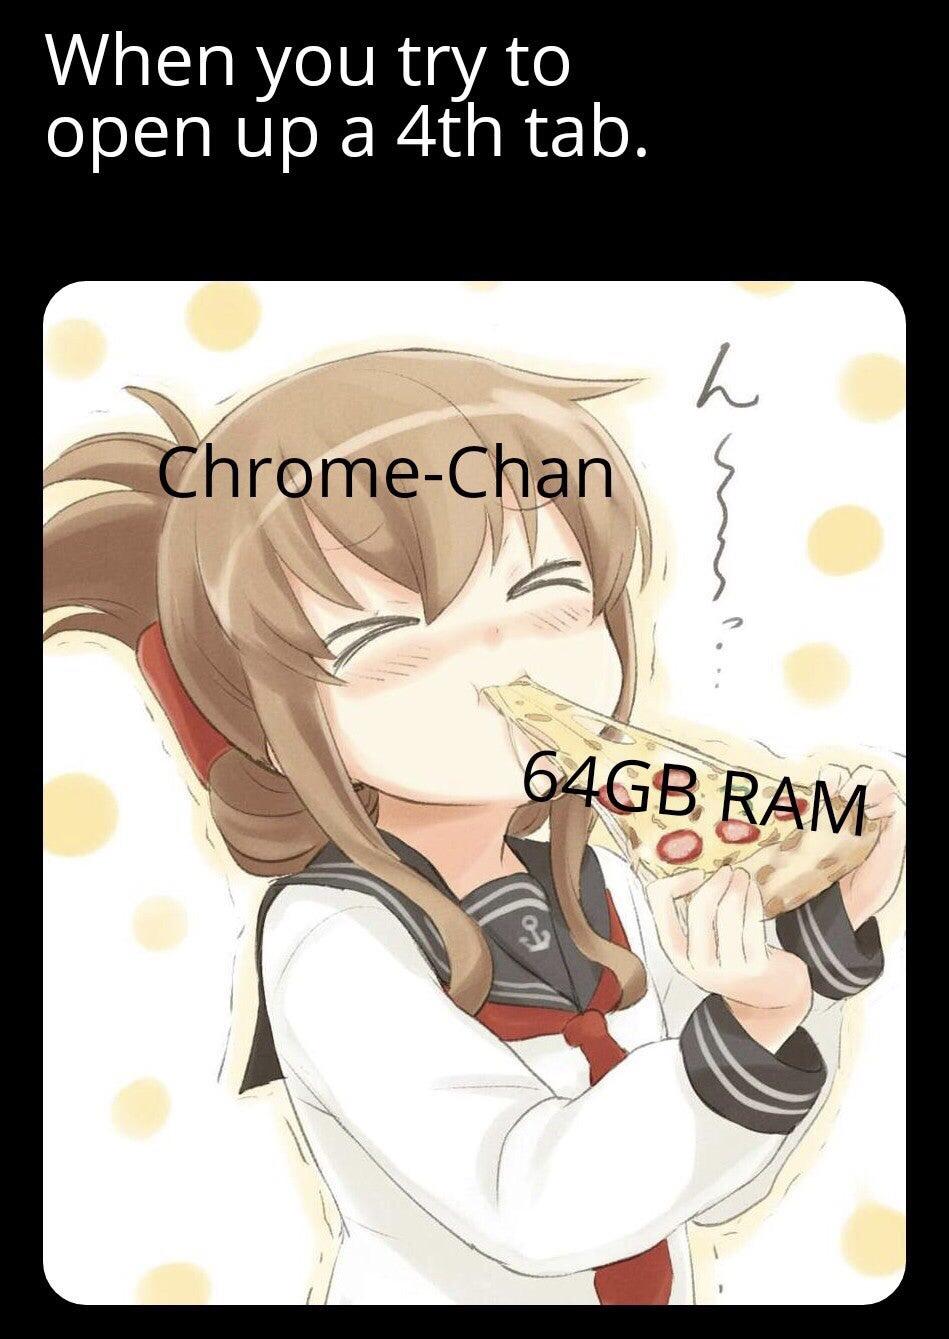 funny gaming memes - cartoon - When you try to open up a 4th tab. h ChromeChan 64GB Ram 3